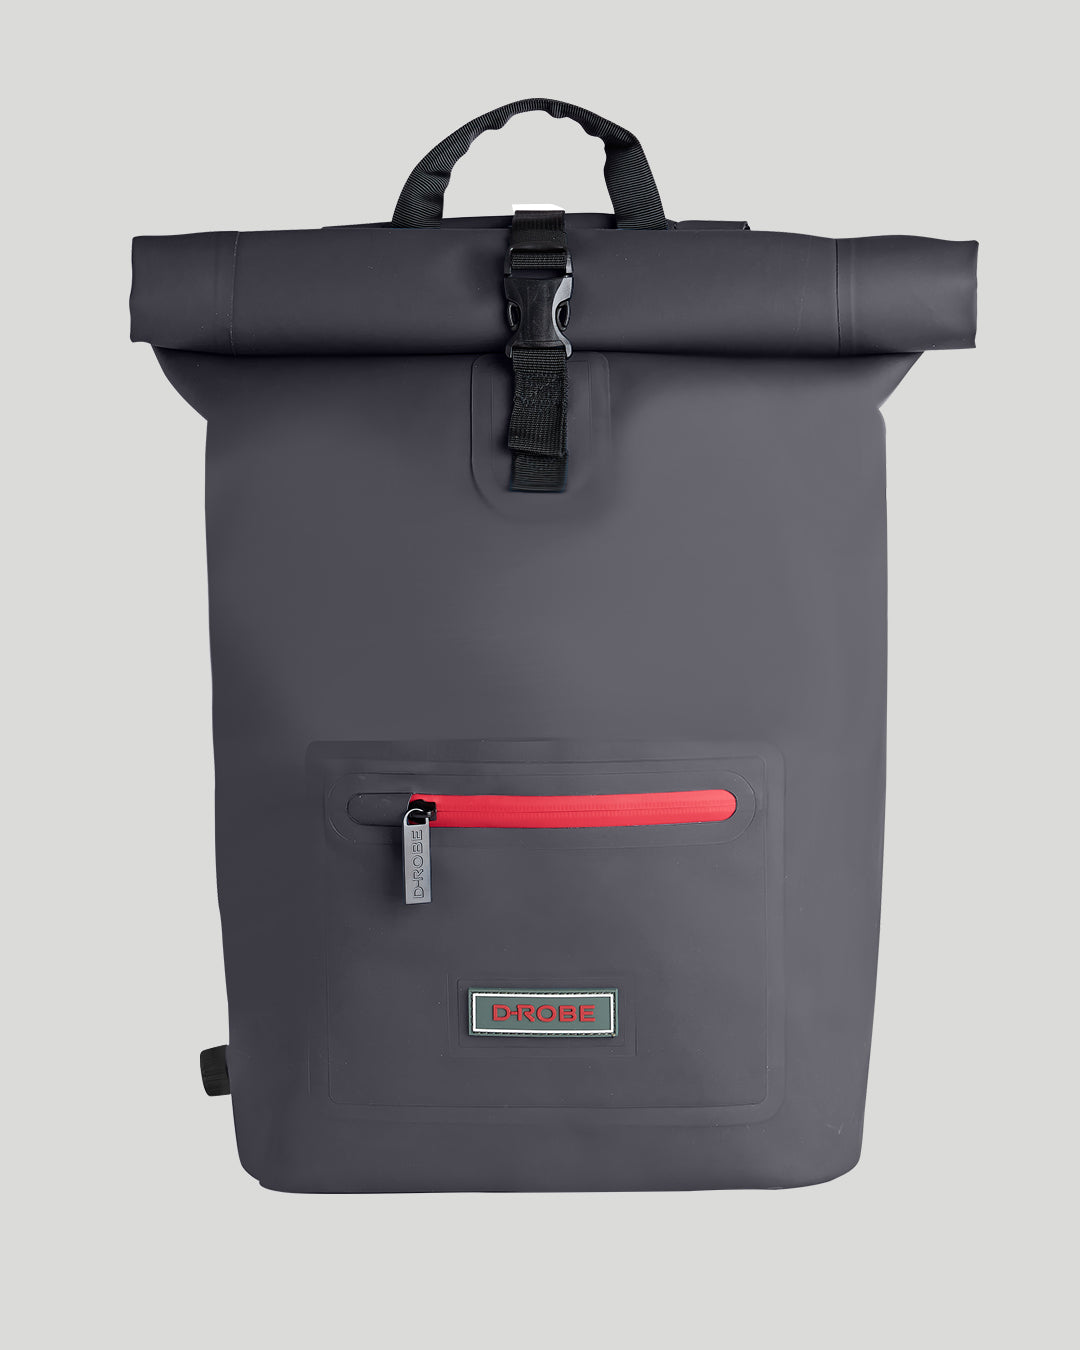 Image of our midnight black roll-top rucksack. Use rolled for extra water protection when tightly closed or use unrolled when extra space is required.